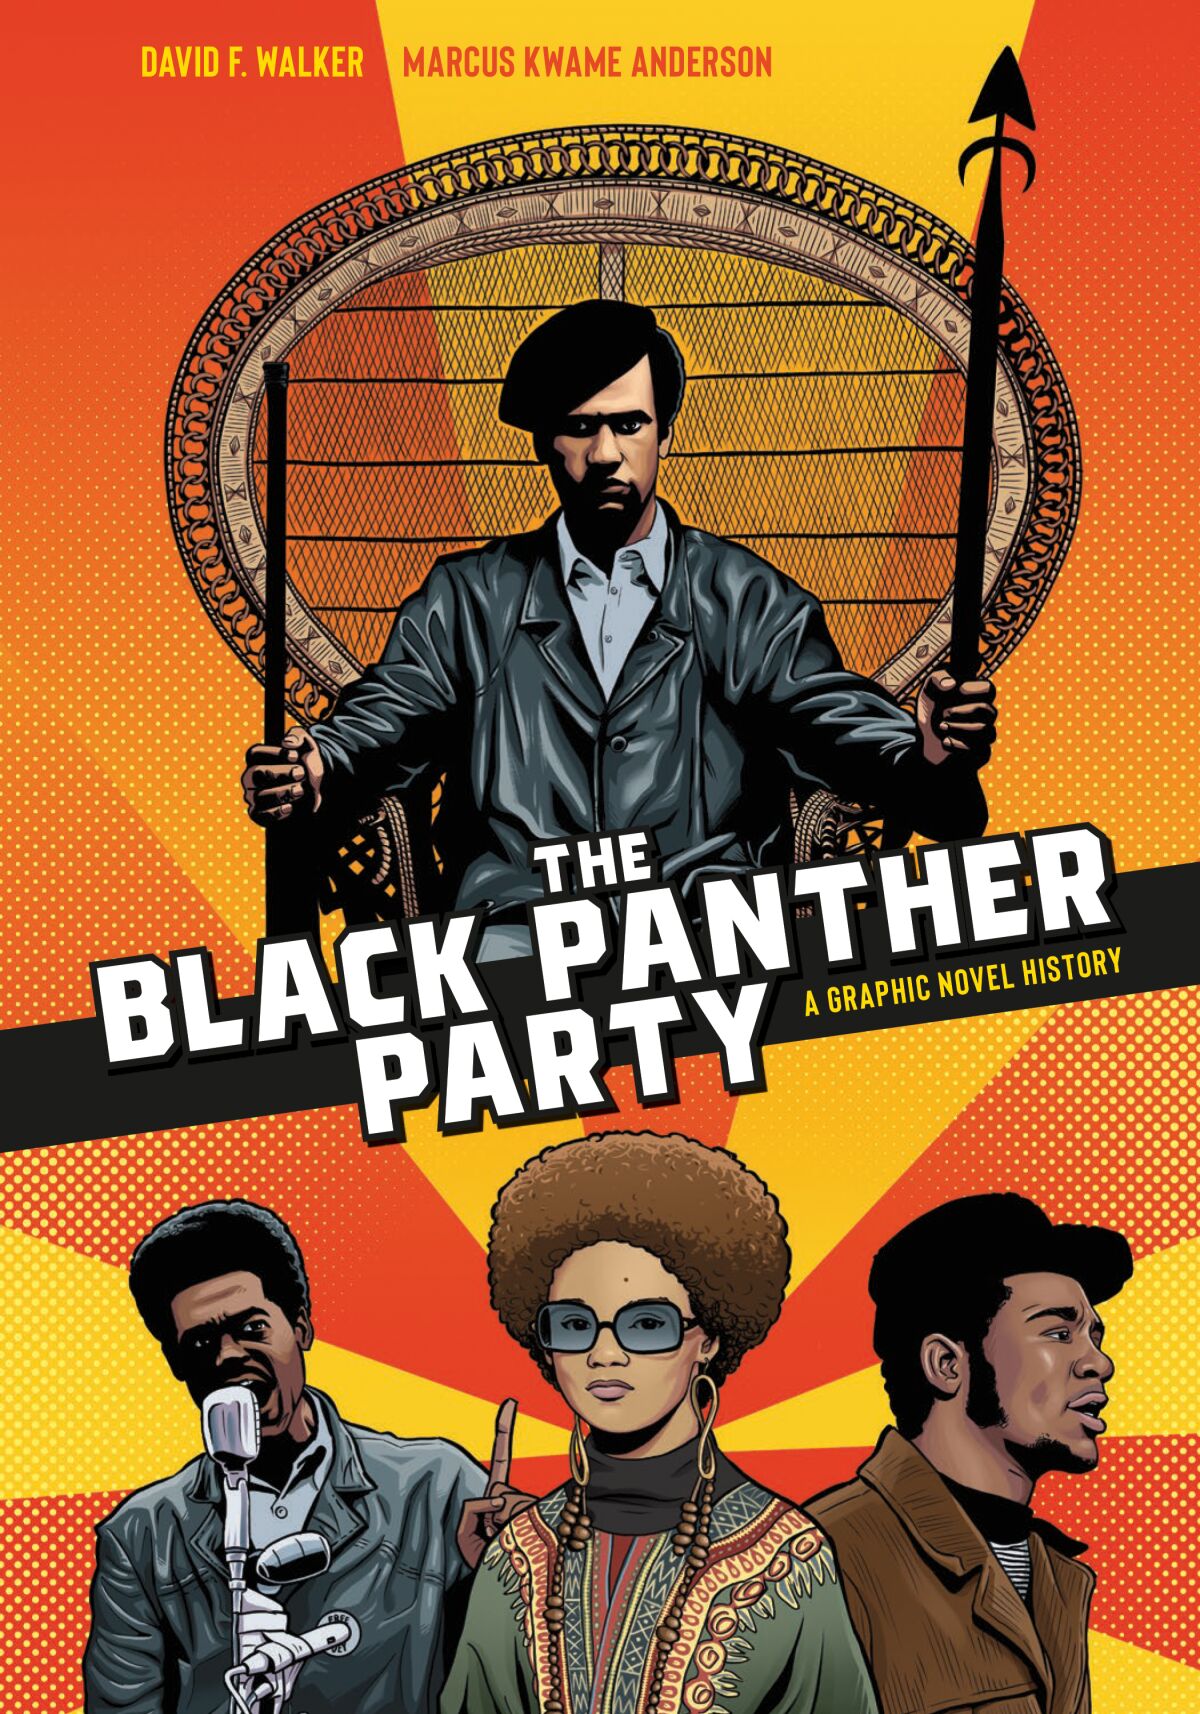 'The Black Panther Party: A Graphic Novel History'